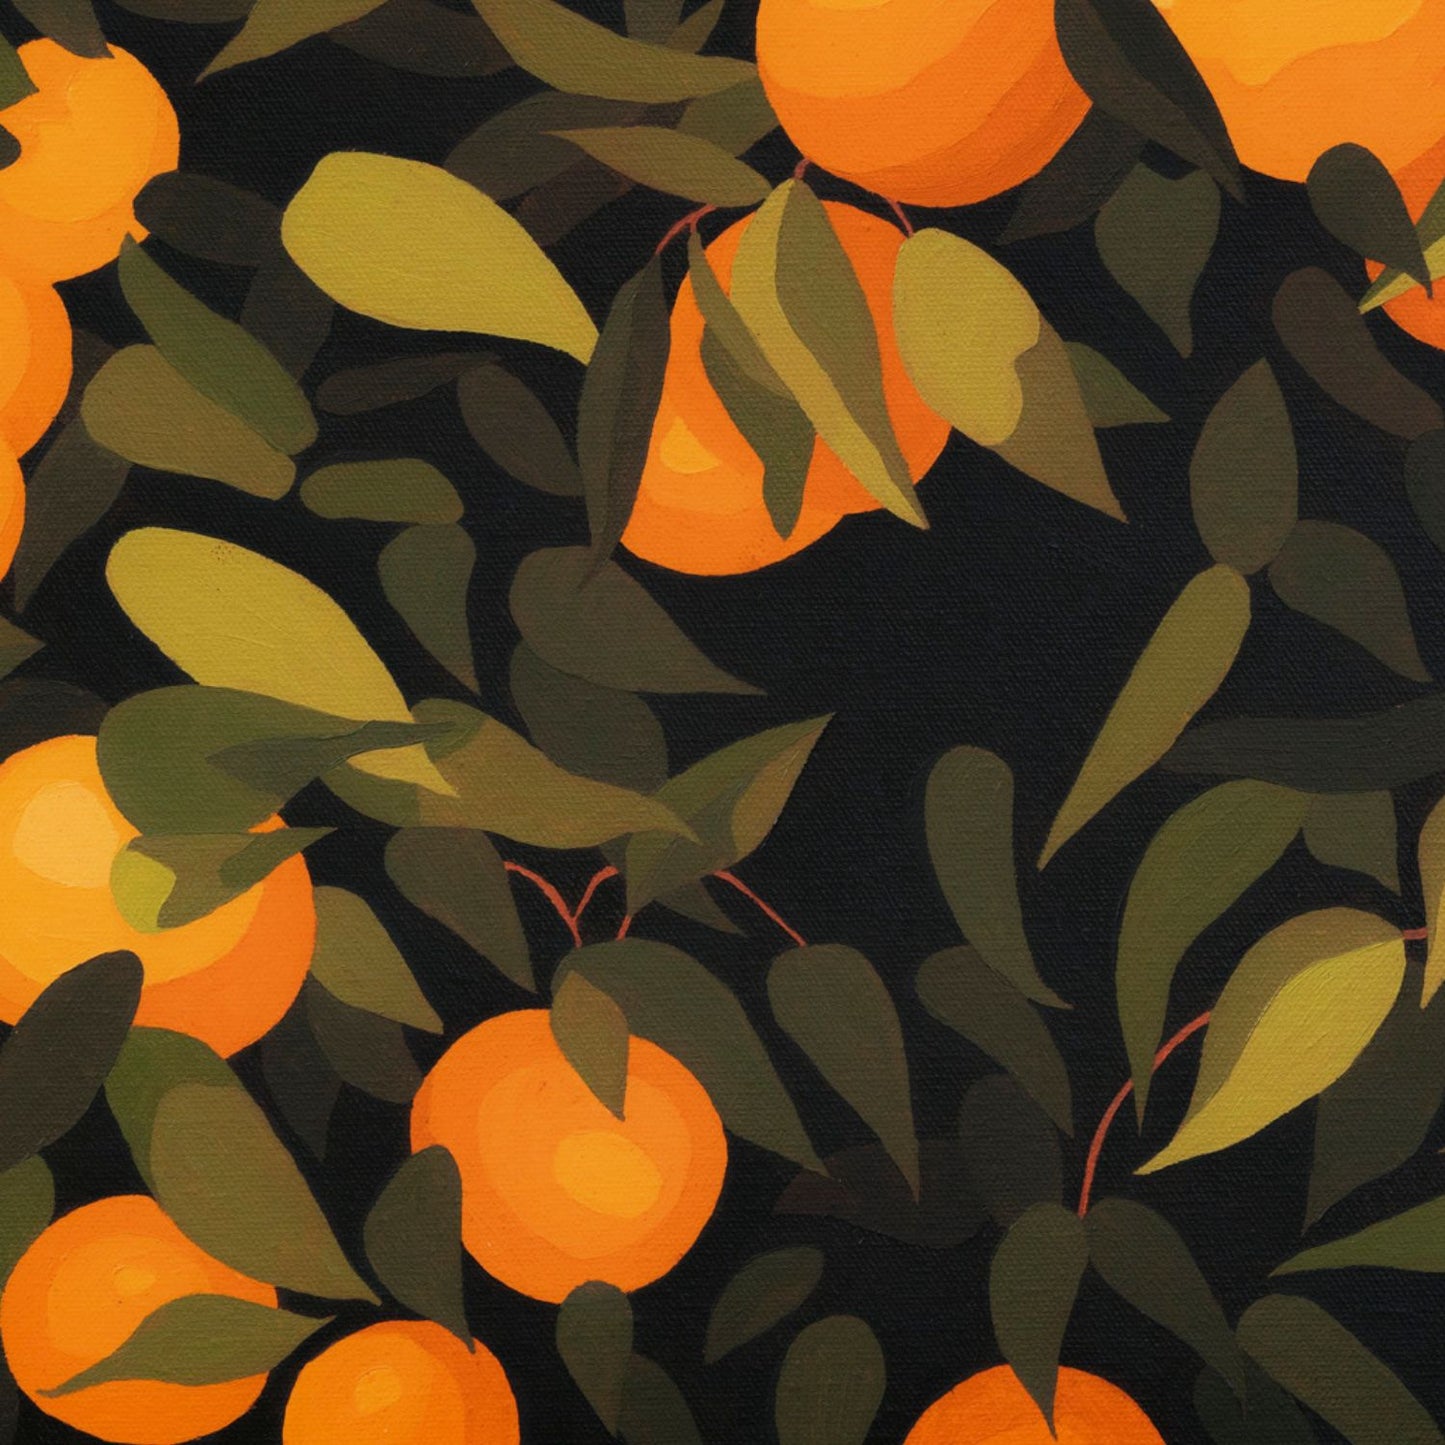 original oil painting of mandarines with green leaves on a dark green background